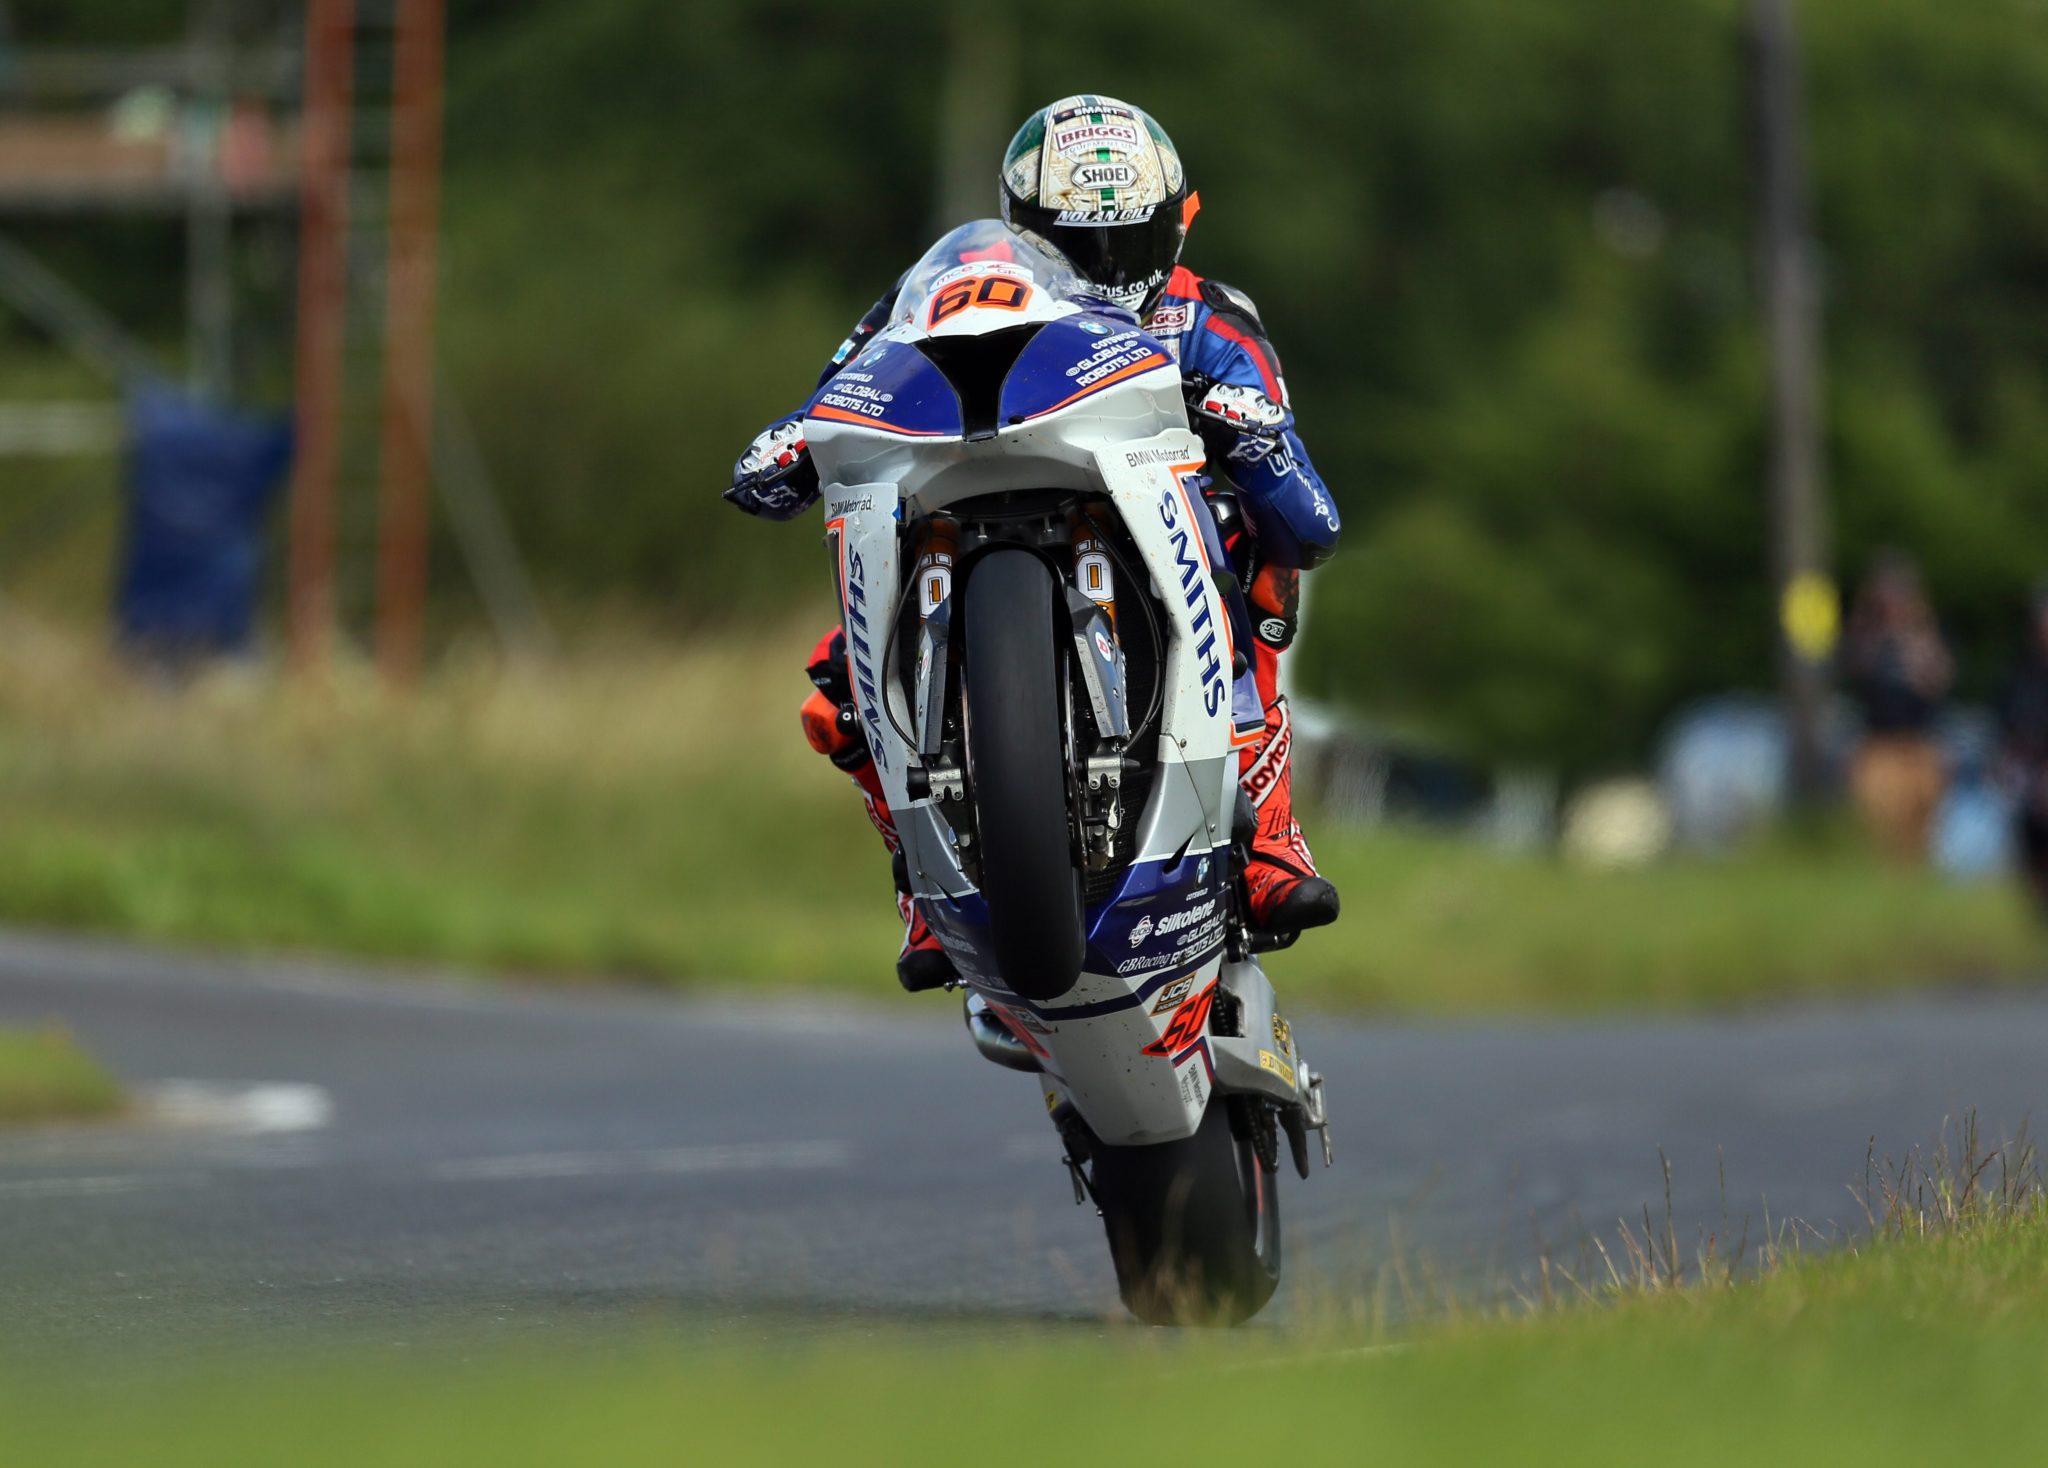 Peter Hickman was the star man at the Ulster GP credit Pacemaker Press International